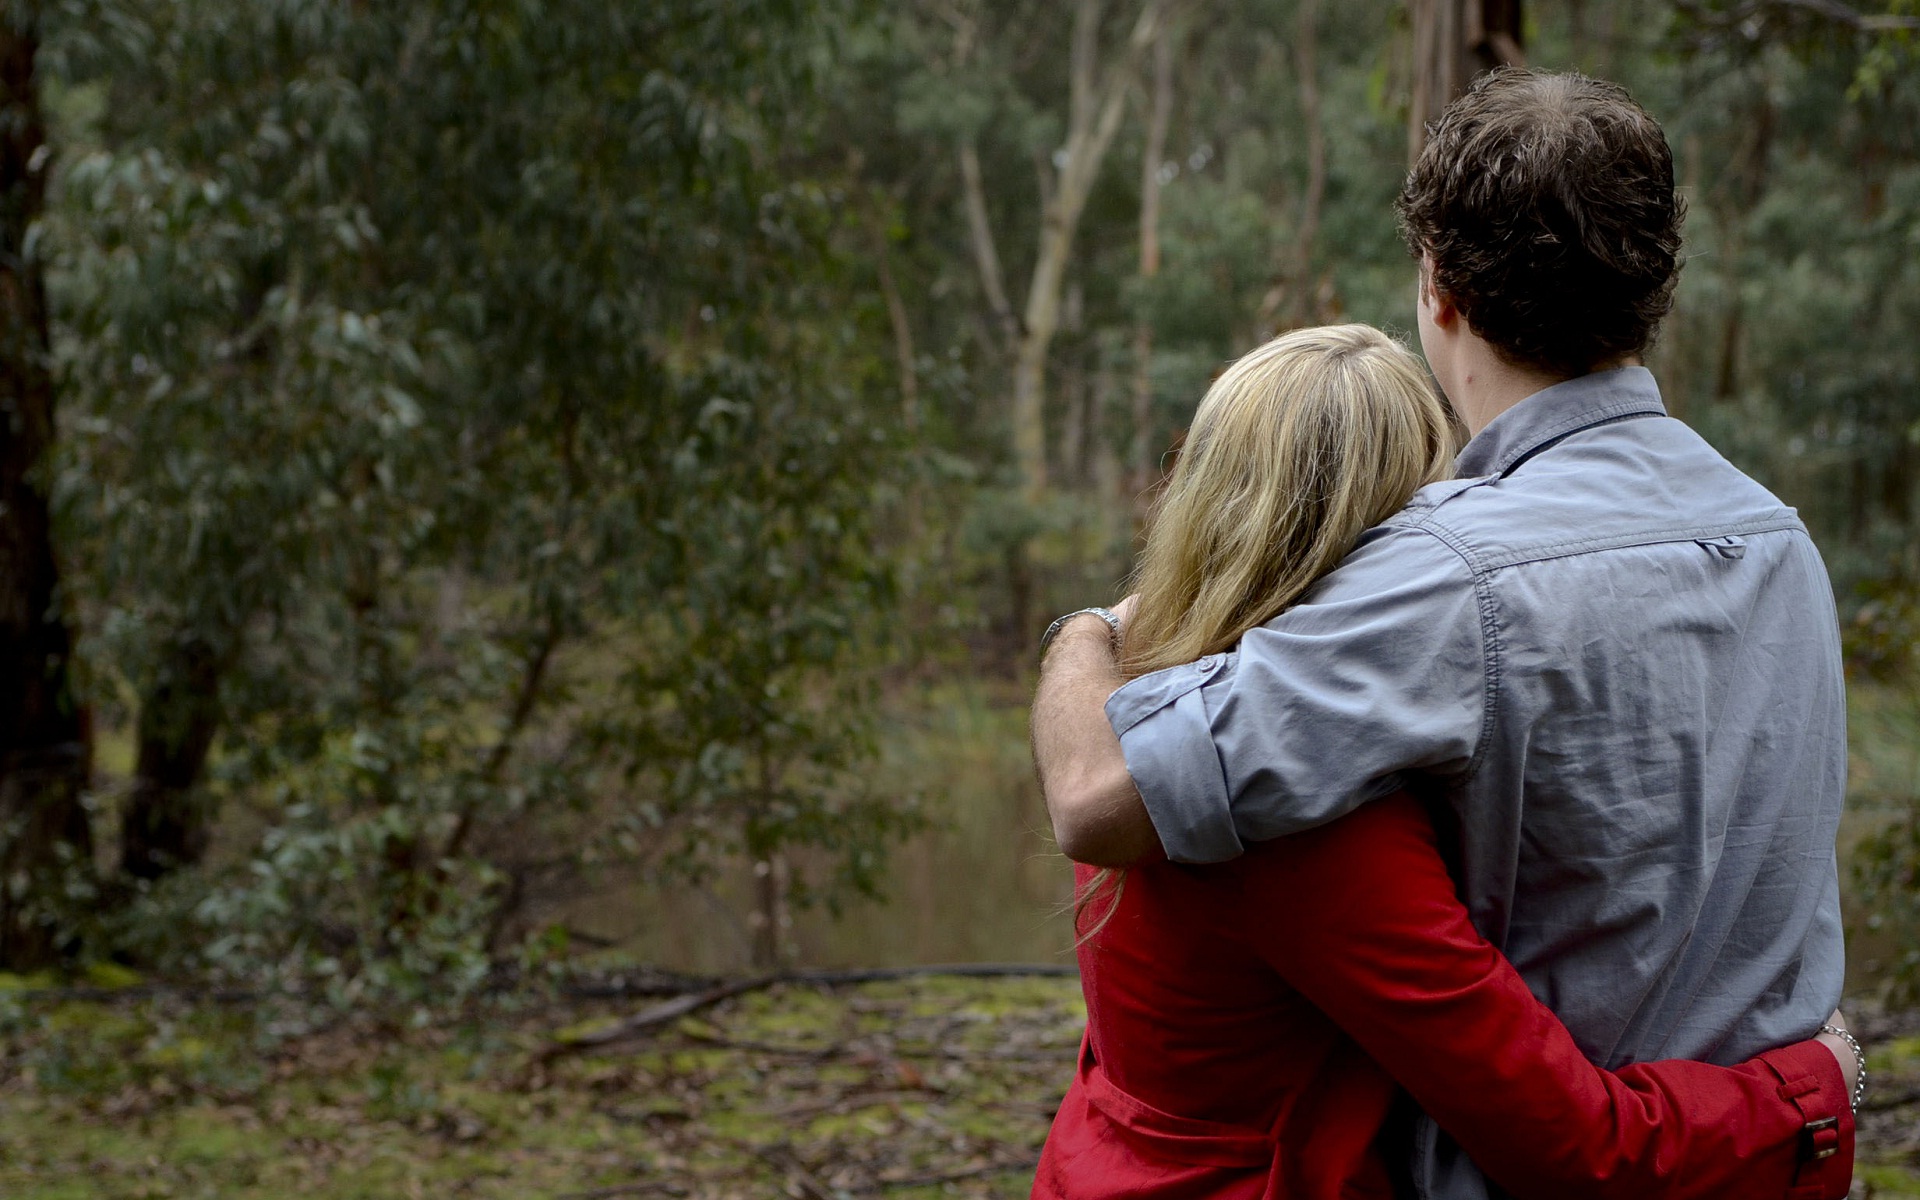 hug wallpaper download,people in nature,photograph,nature,romance,tree